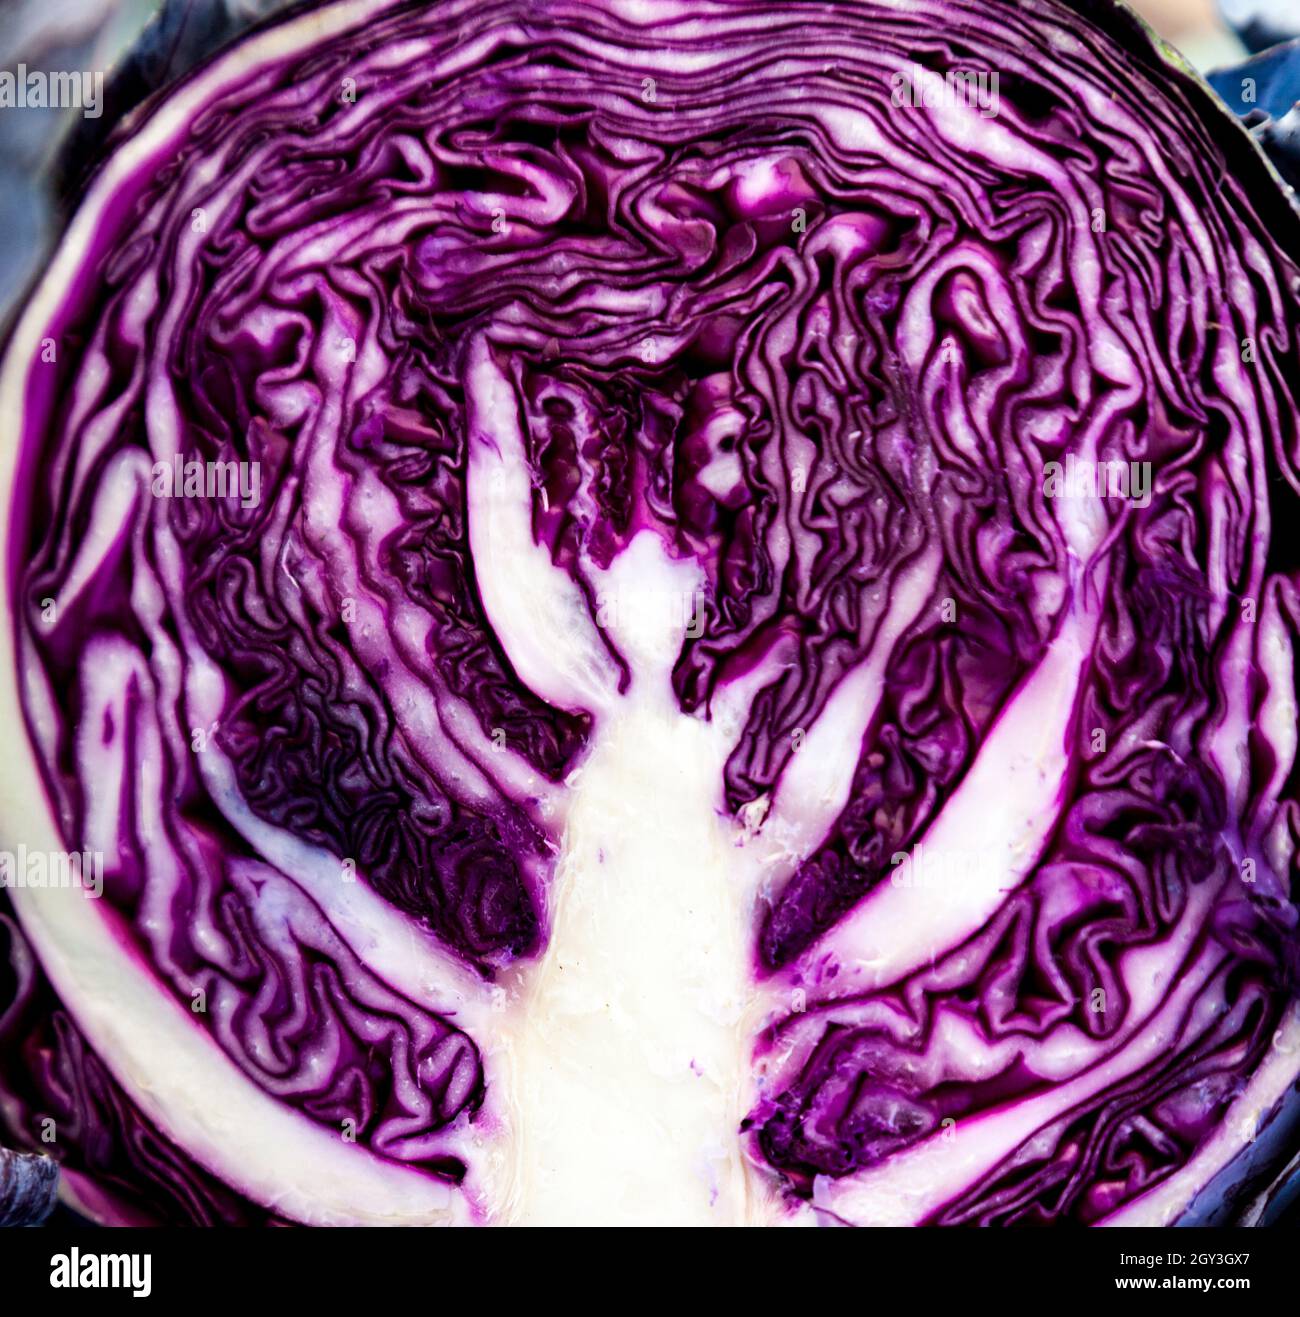 cut through a red cabbage often used in salads Stock Photo